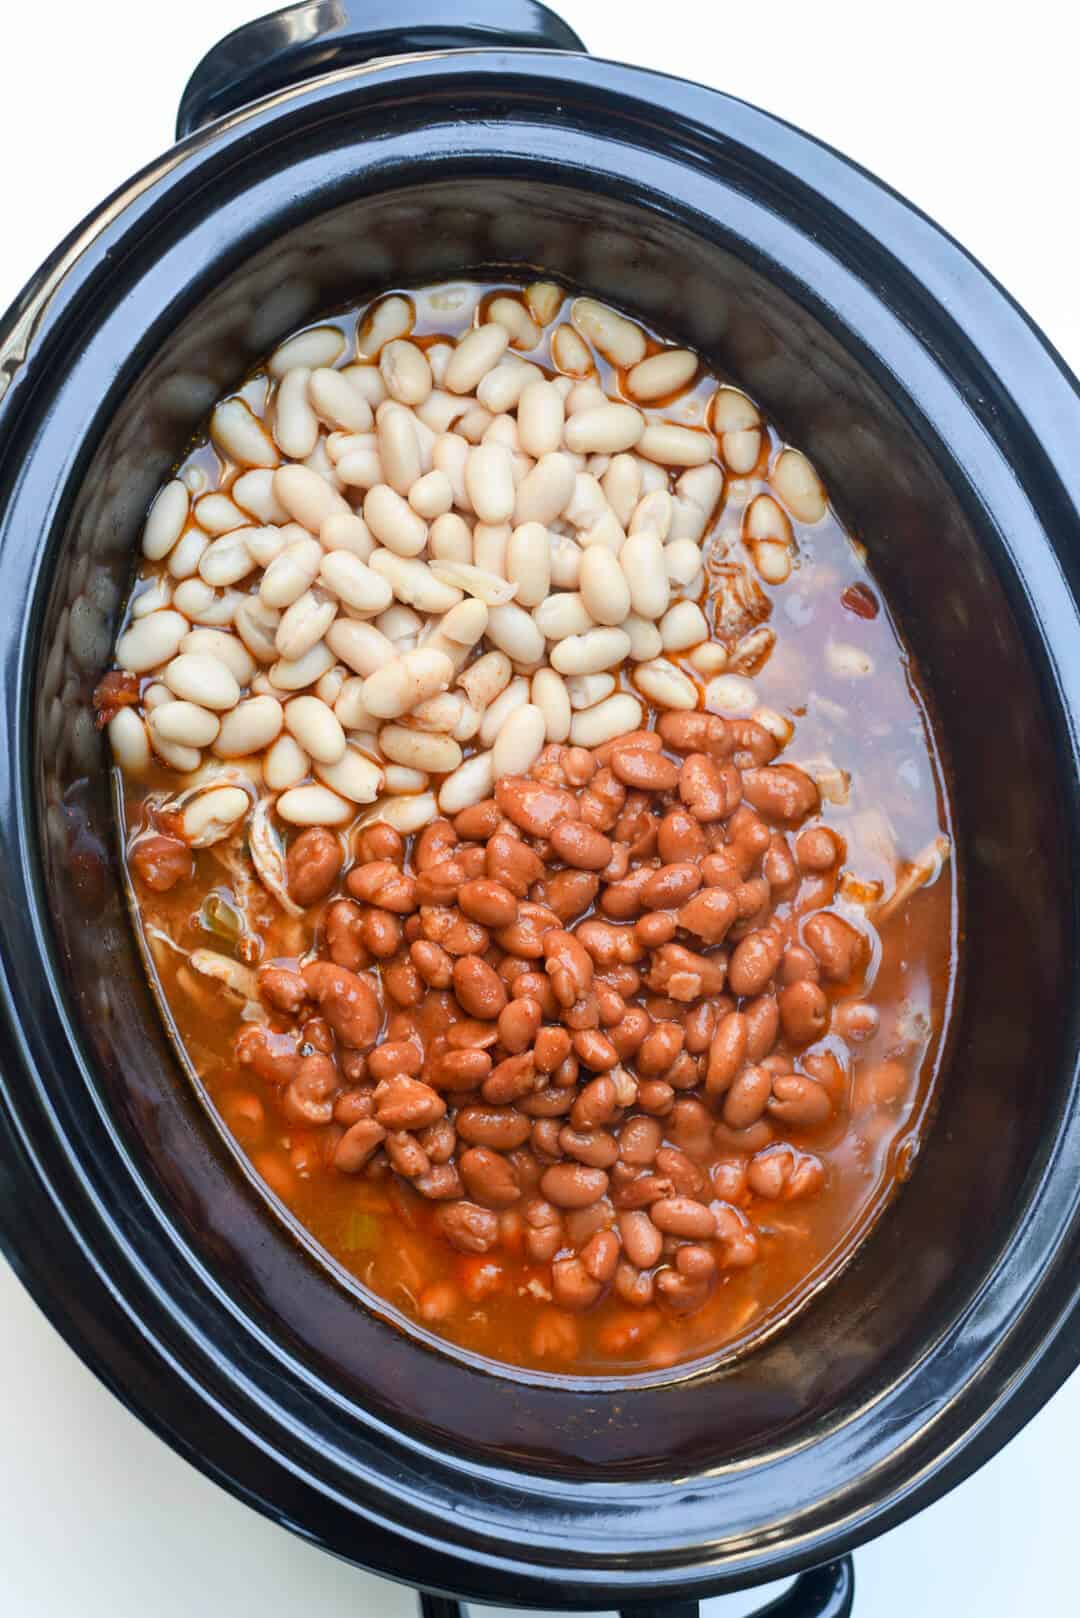 White beans and pinto beans in a slow cooker.